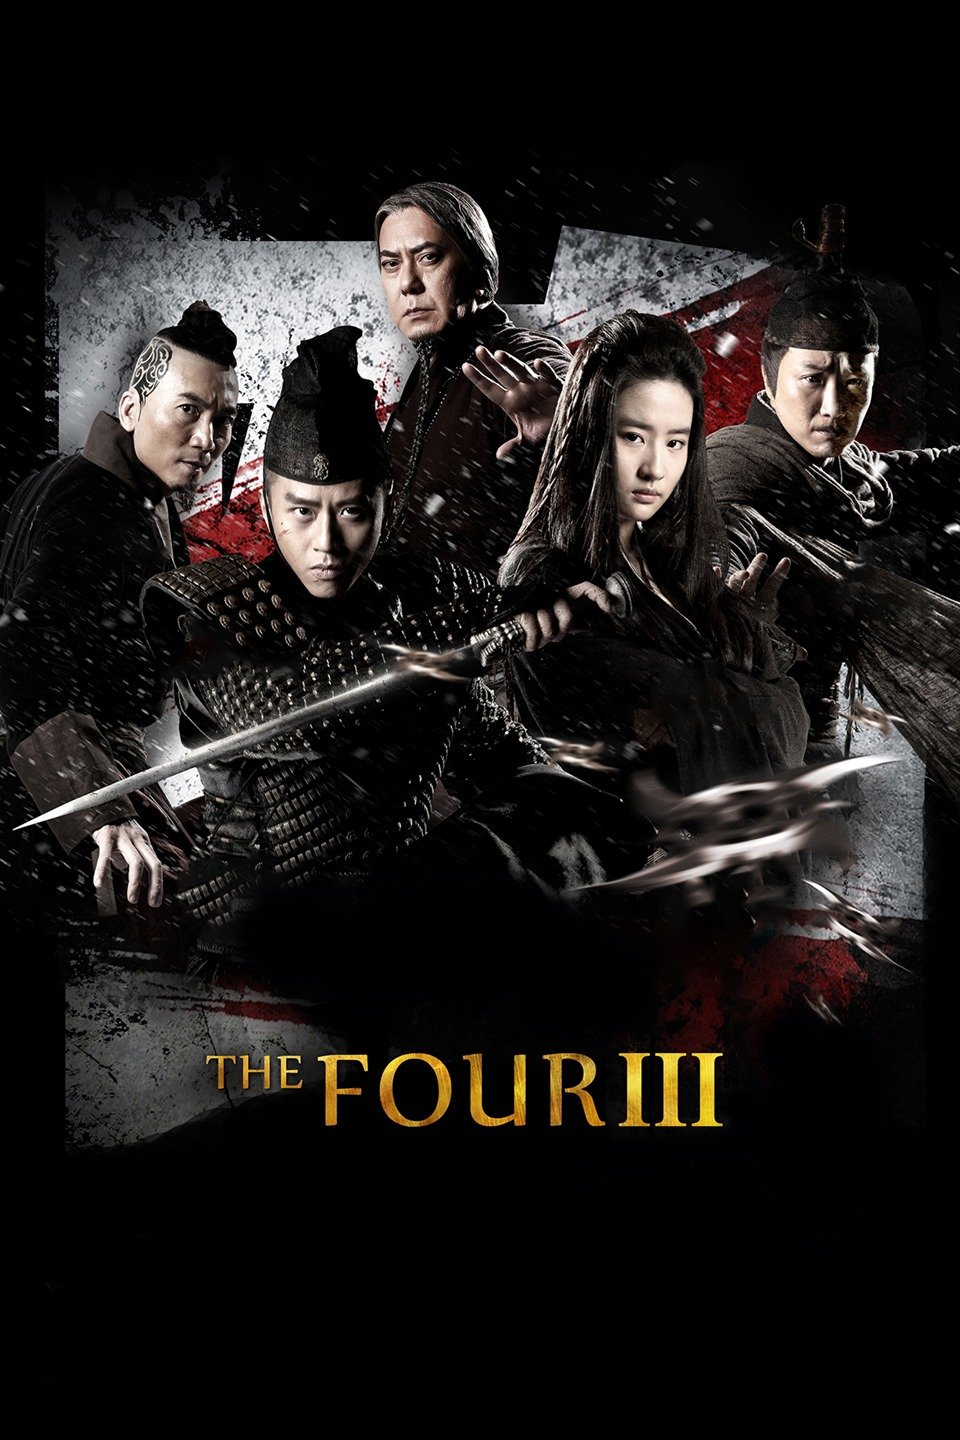 The Four 3: Kingdom Of Blood (2014)